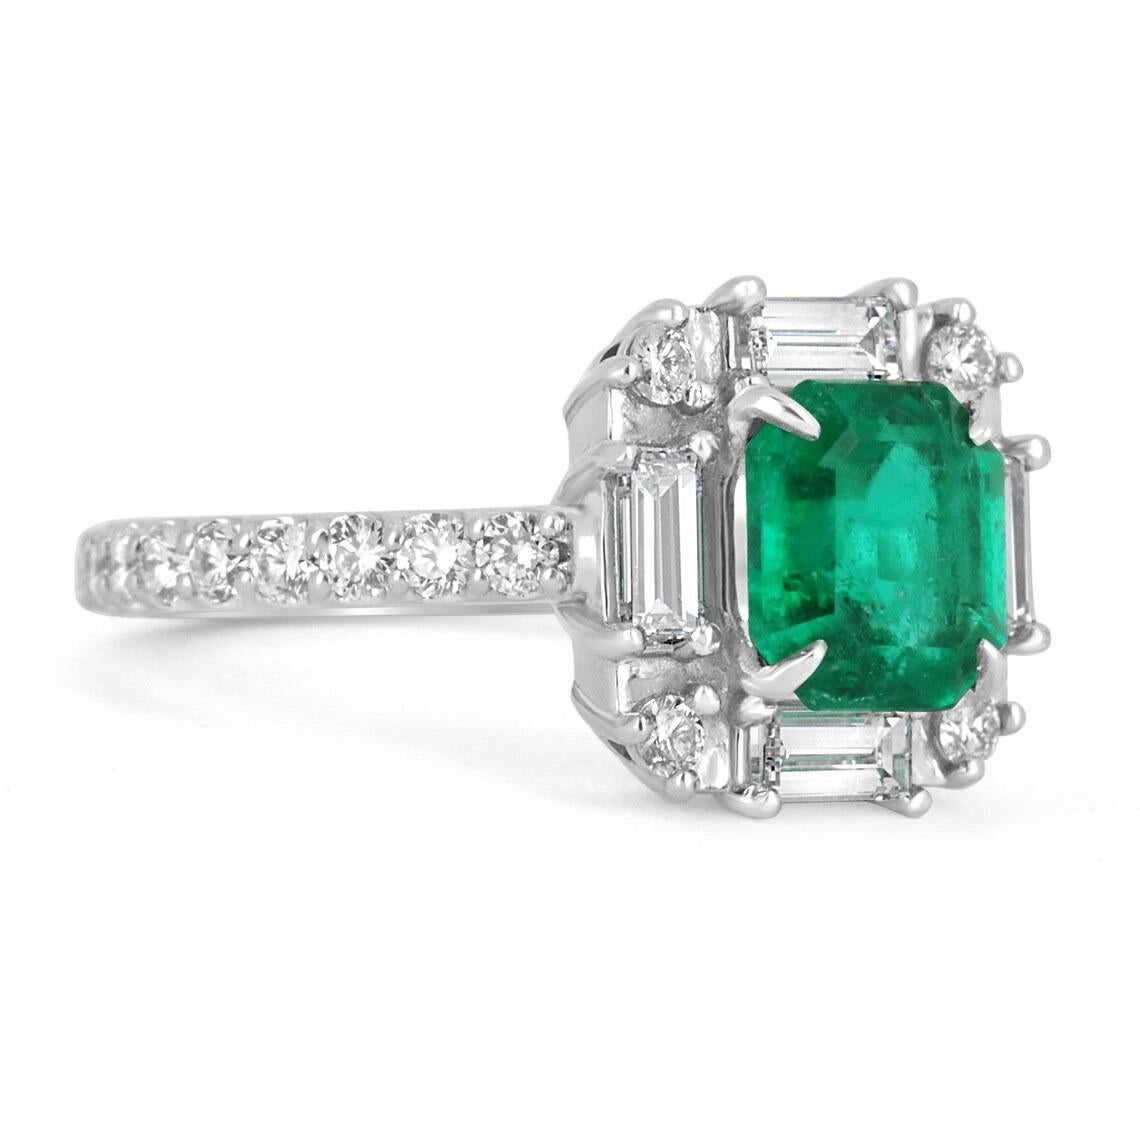 Featured is a remarkable emerald and diamond engagement ring. The center stone showcases a stunning, vivid dark green, AAA+ quality Asscher cut Colombian emerald with excellent luster. Impressive eye clarity, with minimal imperfections seen within